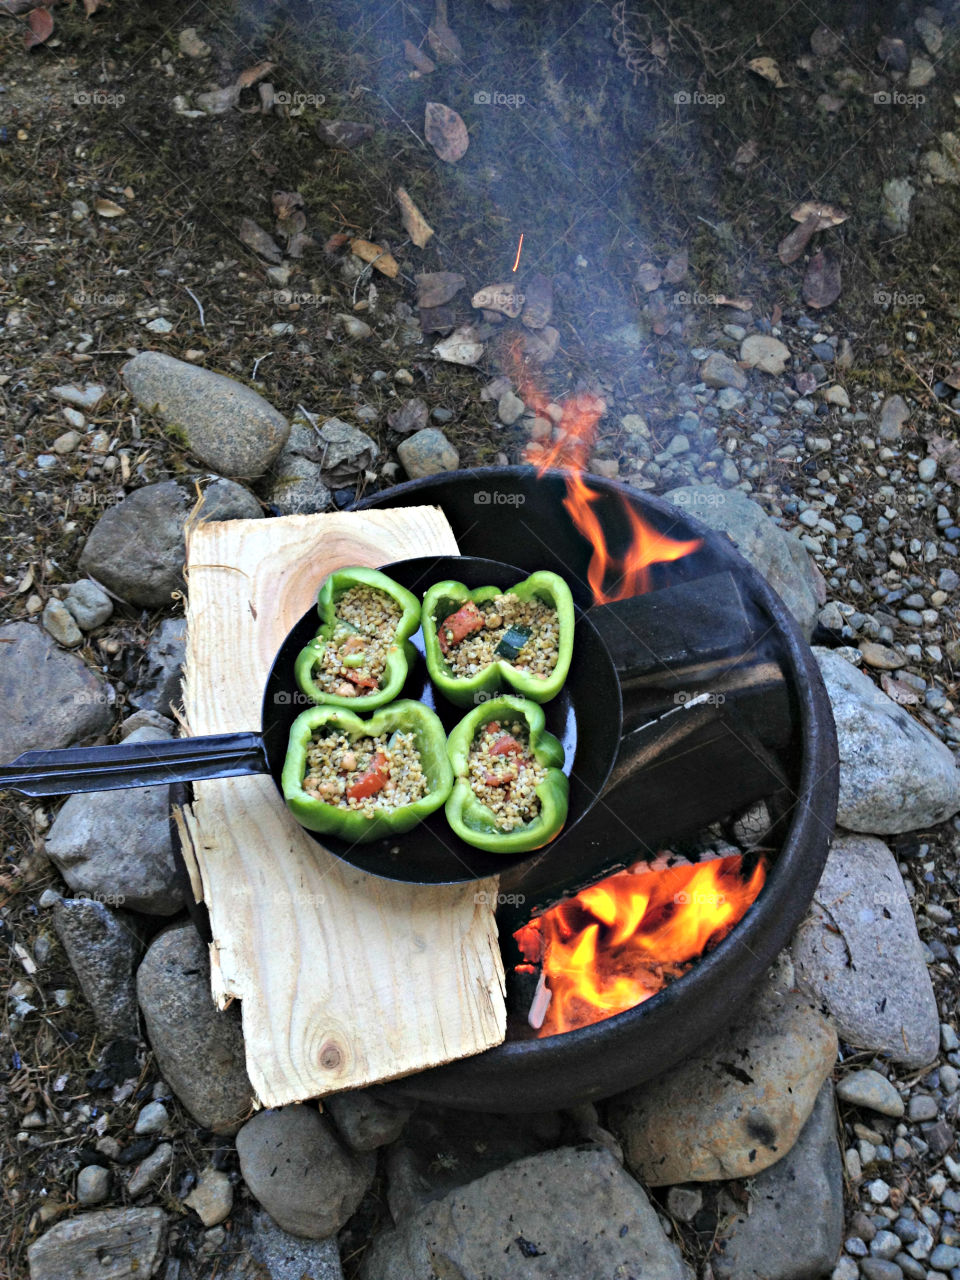 Cooking Stuffed Peppers on the Campfire